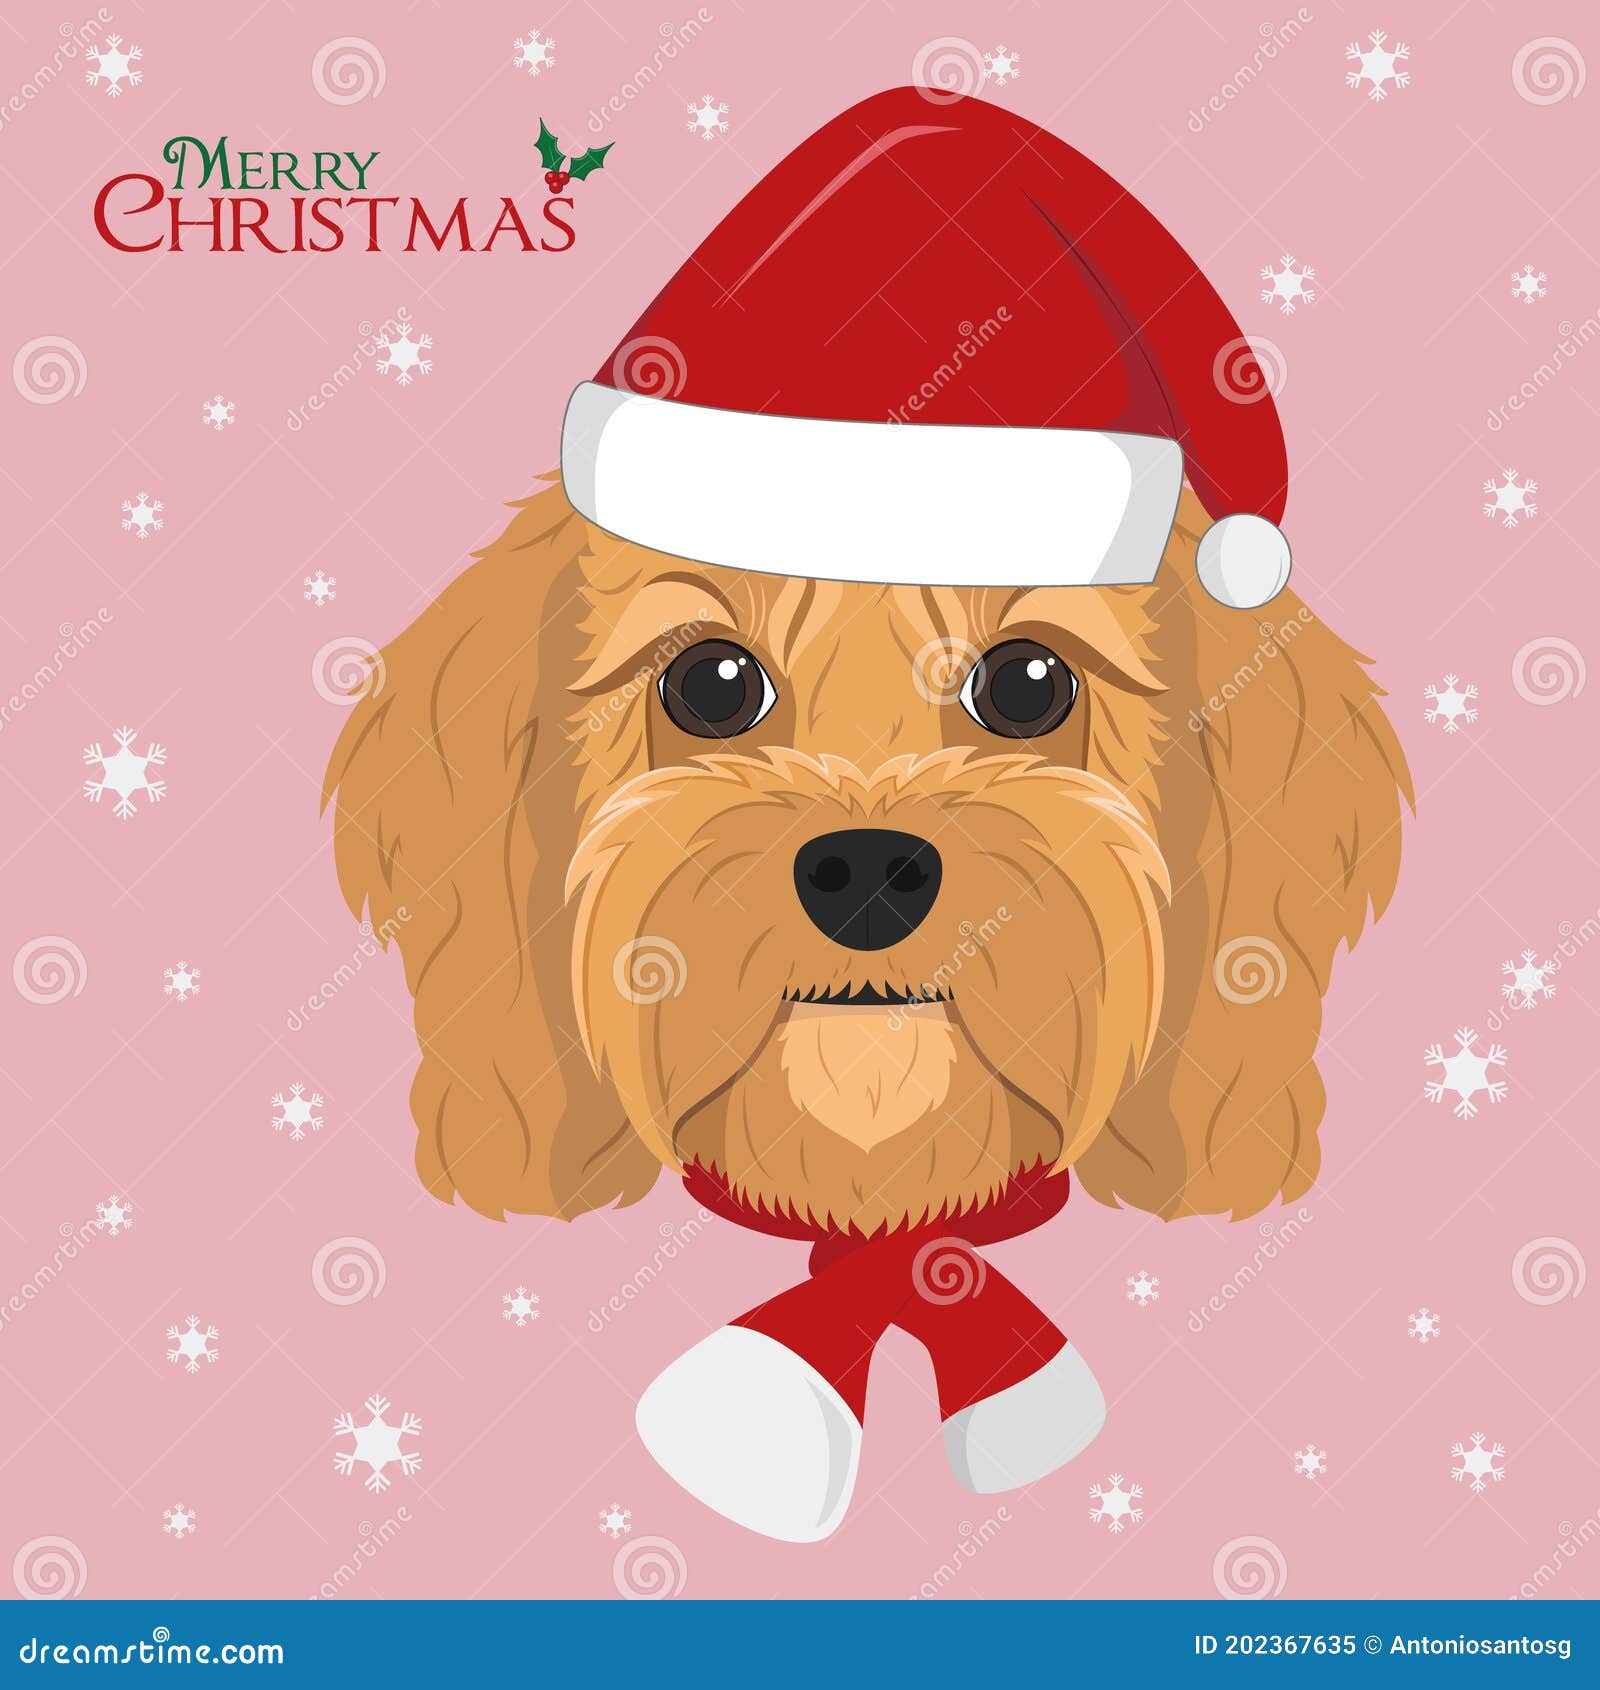 cavoodle dog with red santas hat and a woolen scarf for winter